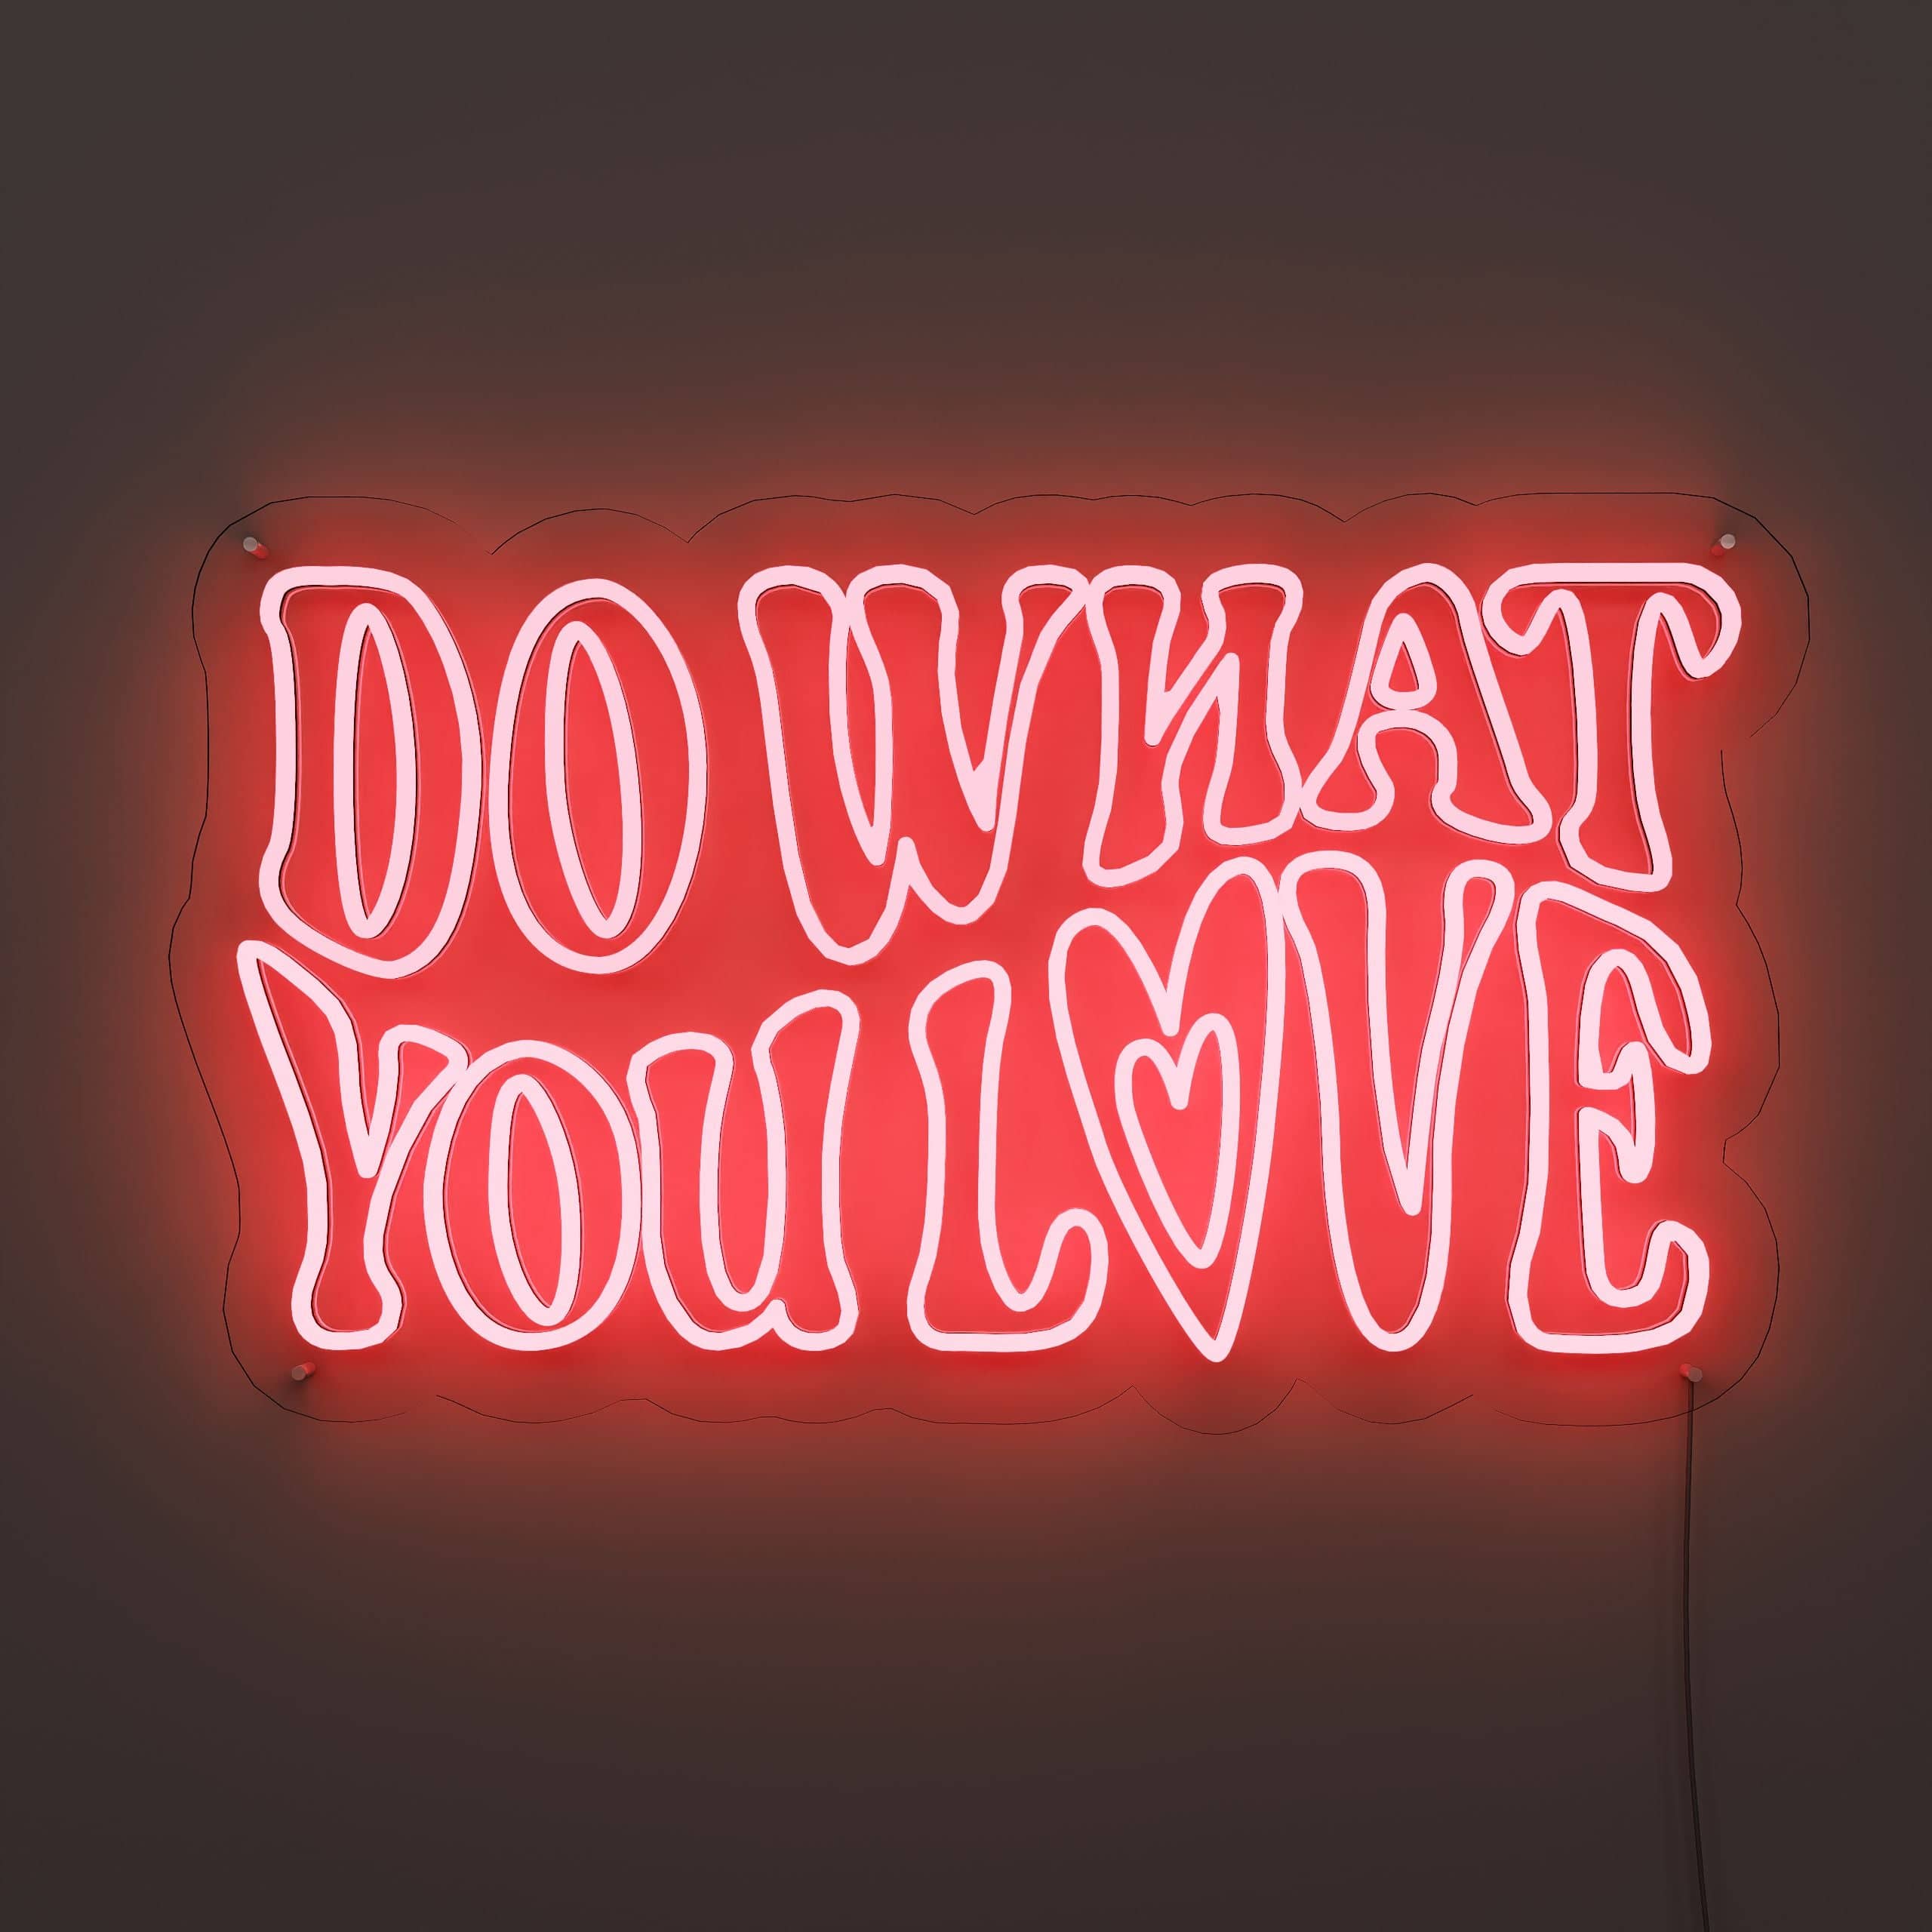 cultivate-your-interests-neon-sign-lite